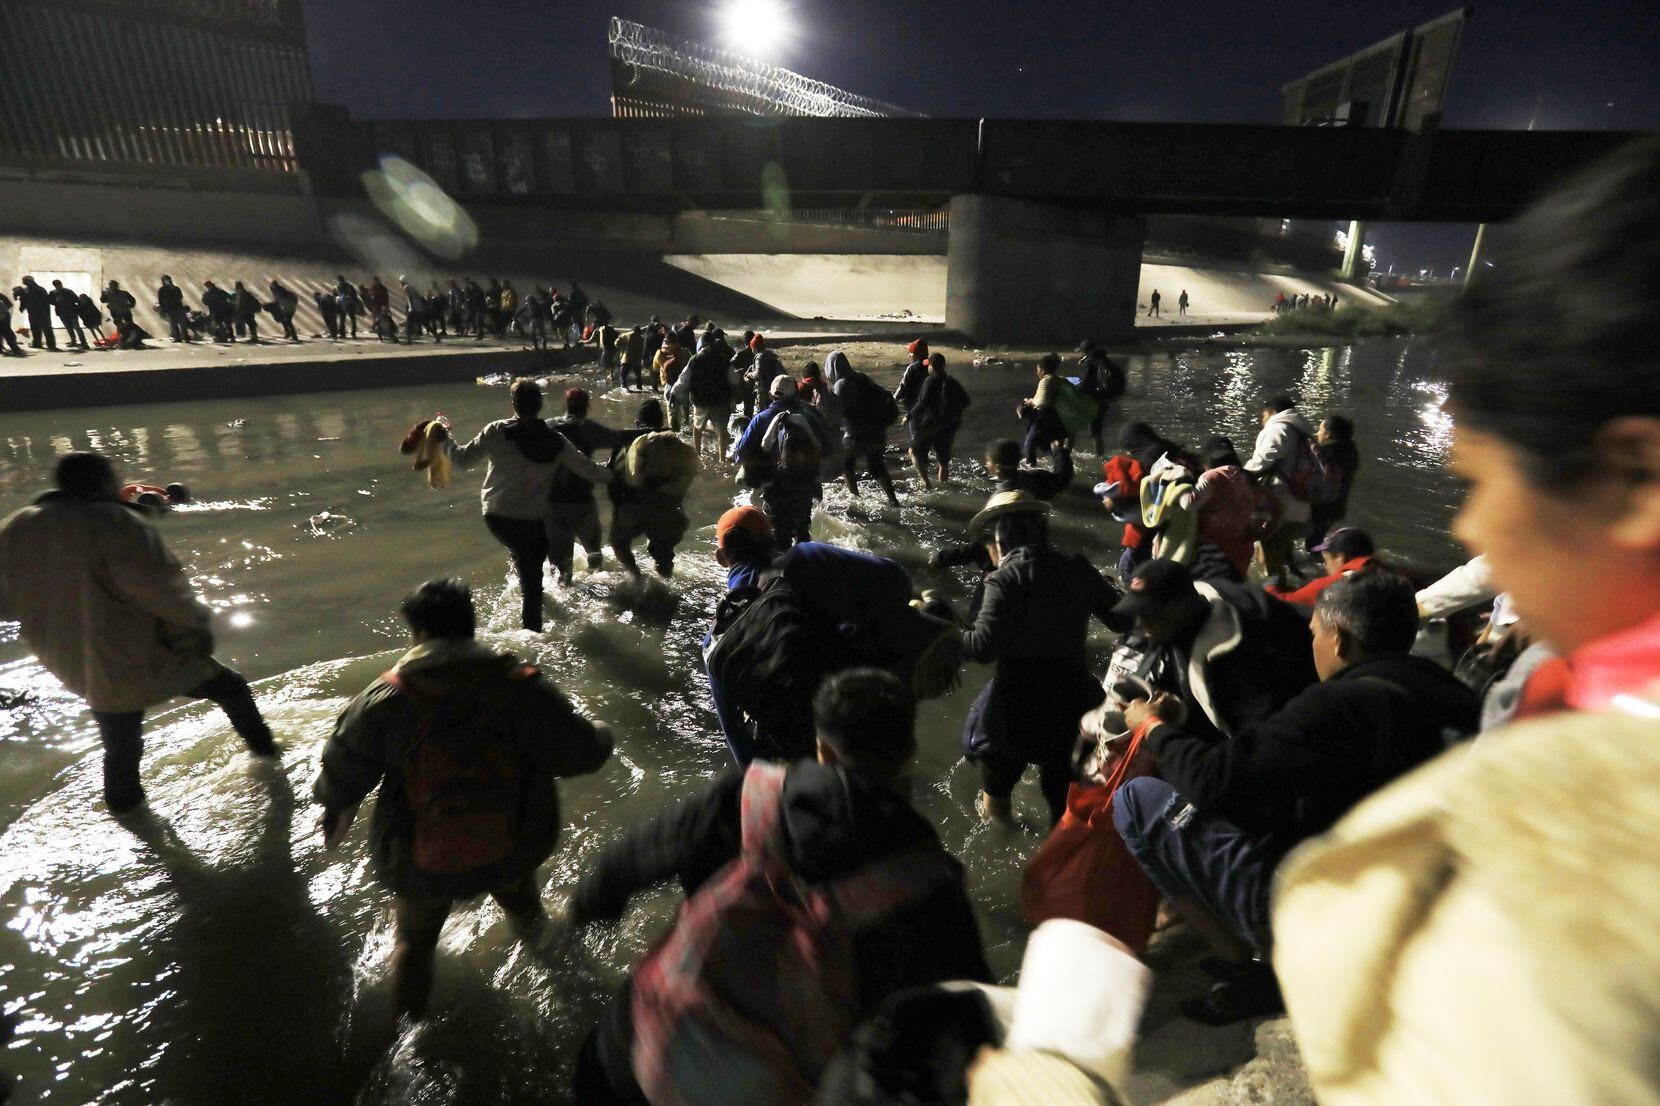 Hundreds of migrants made their way from Ciudad Juarez to El Paso on Dec. 11.